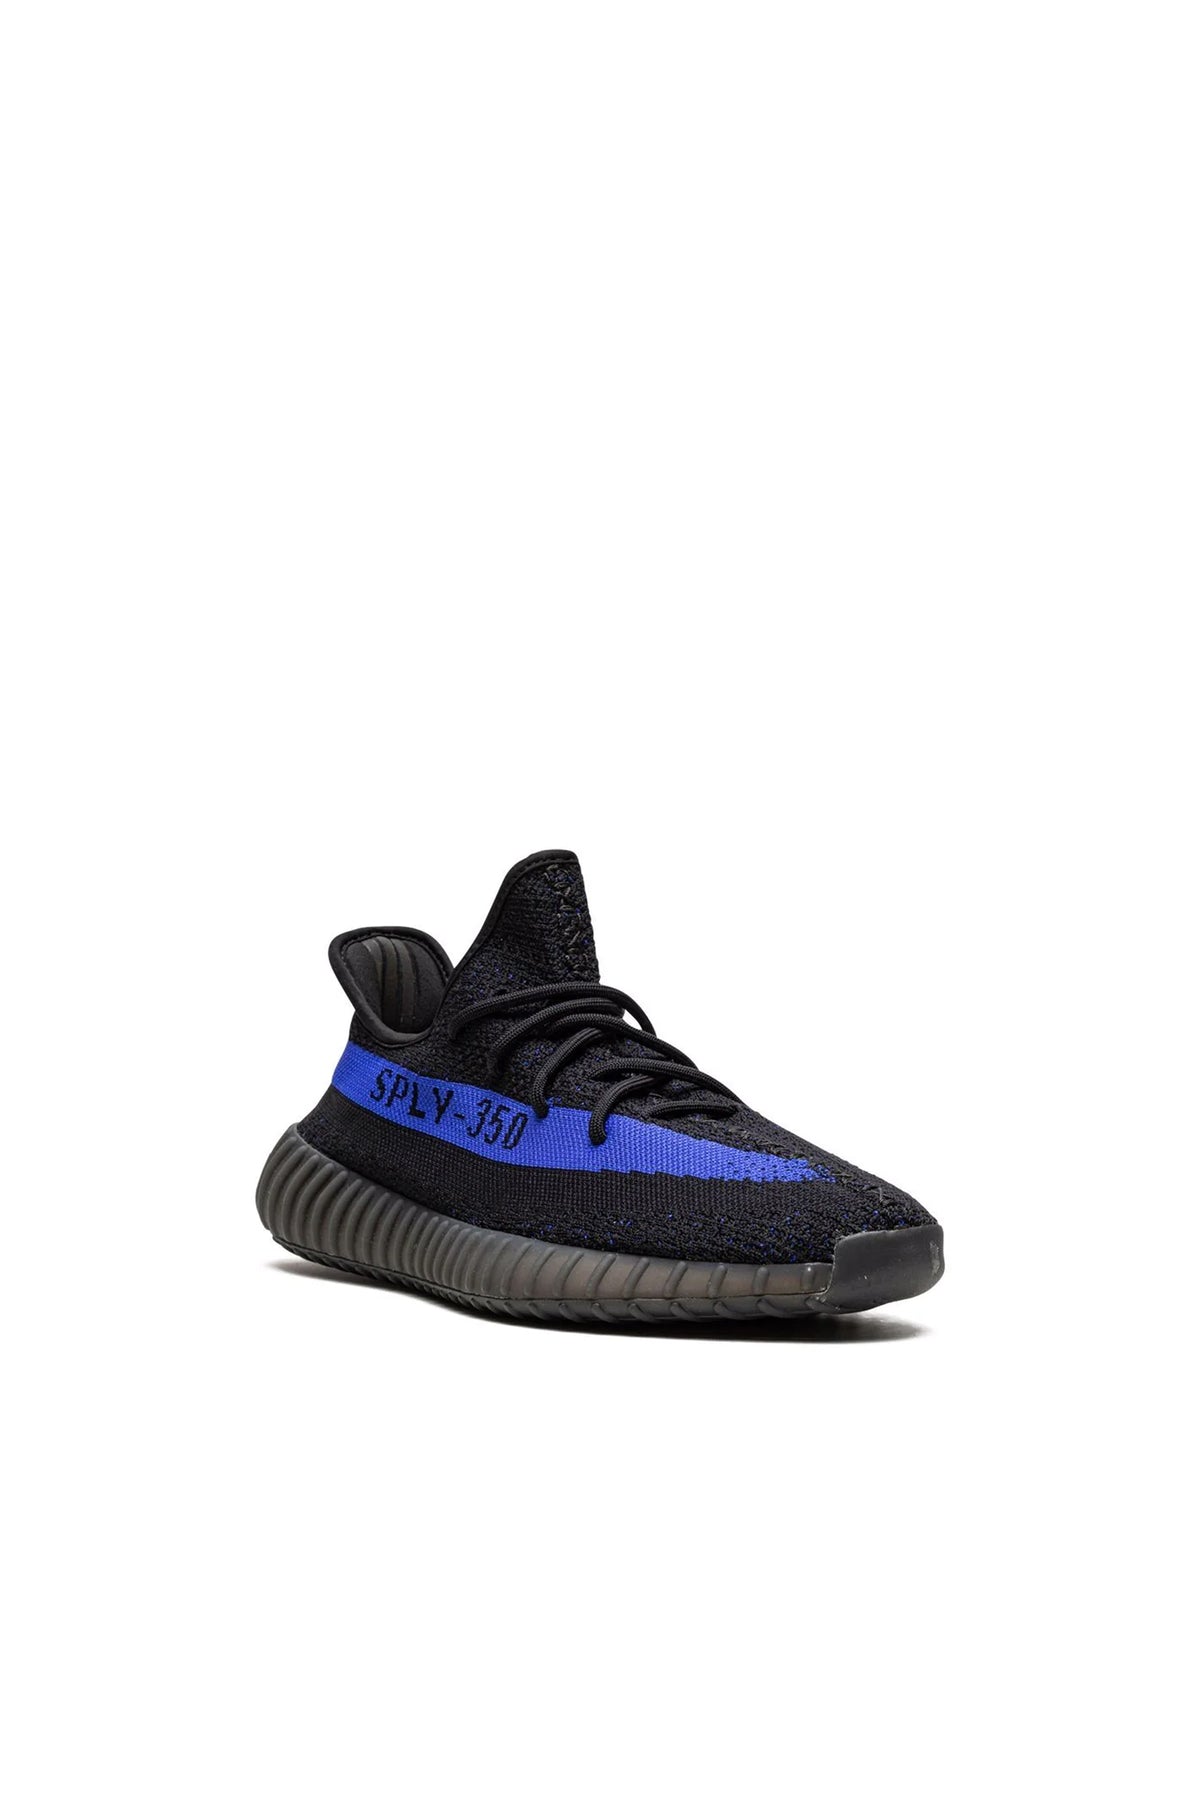 Adidas YEEZY Boost 350 V2 "Dazzling Blue" sneakers